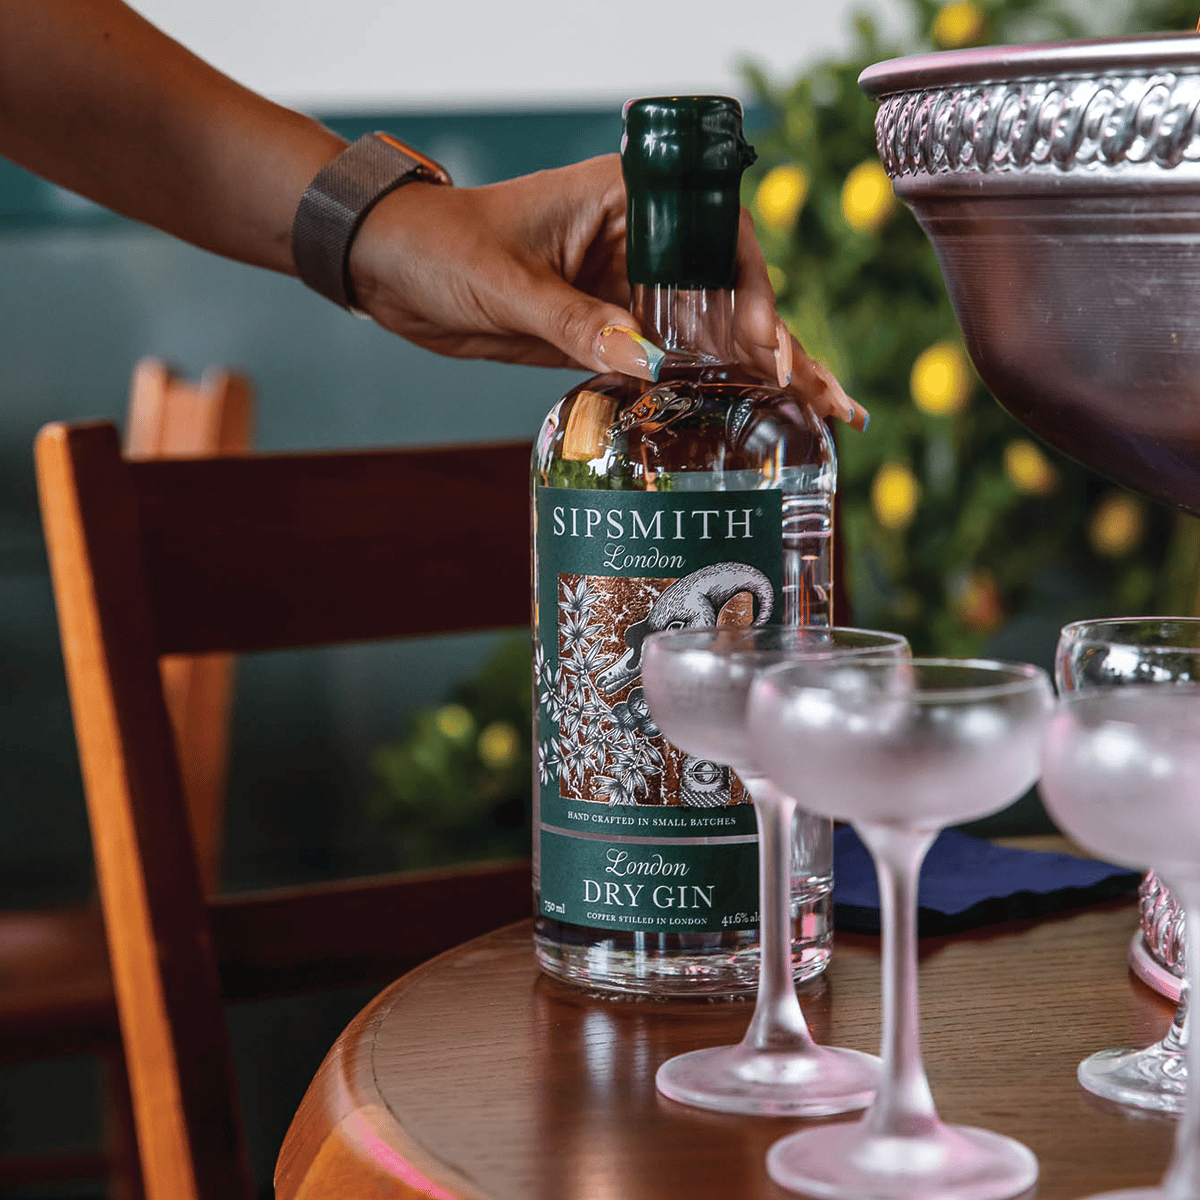 a closeup of Sipsmith gin bottle with glasses on table